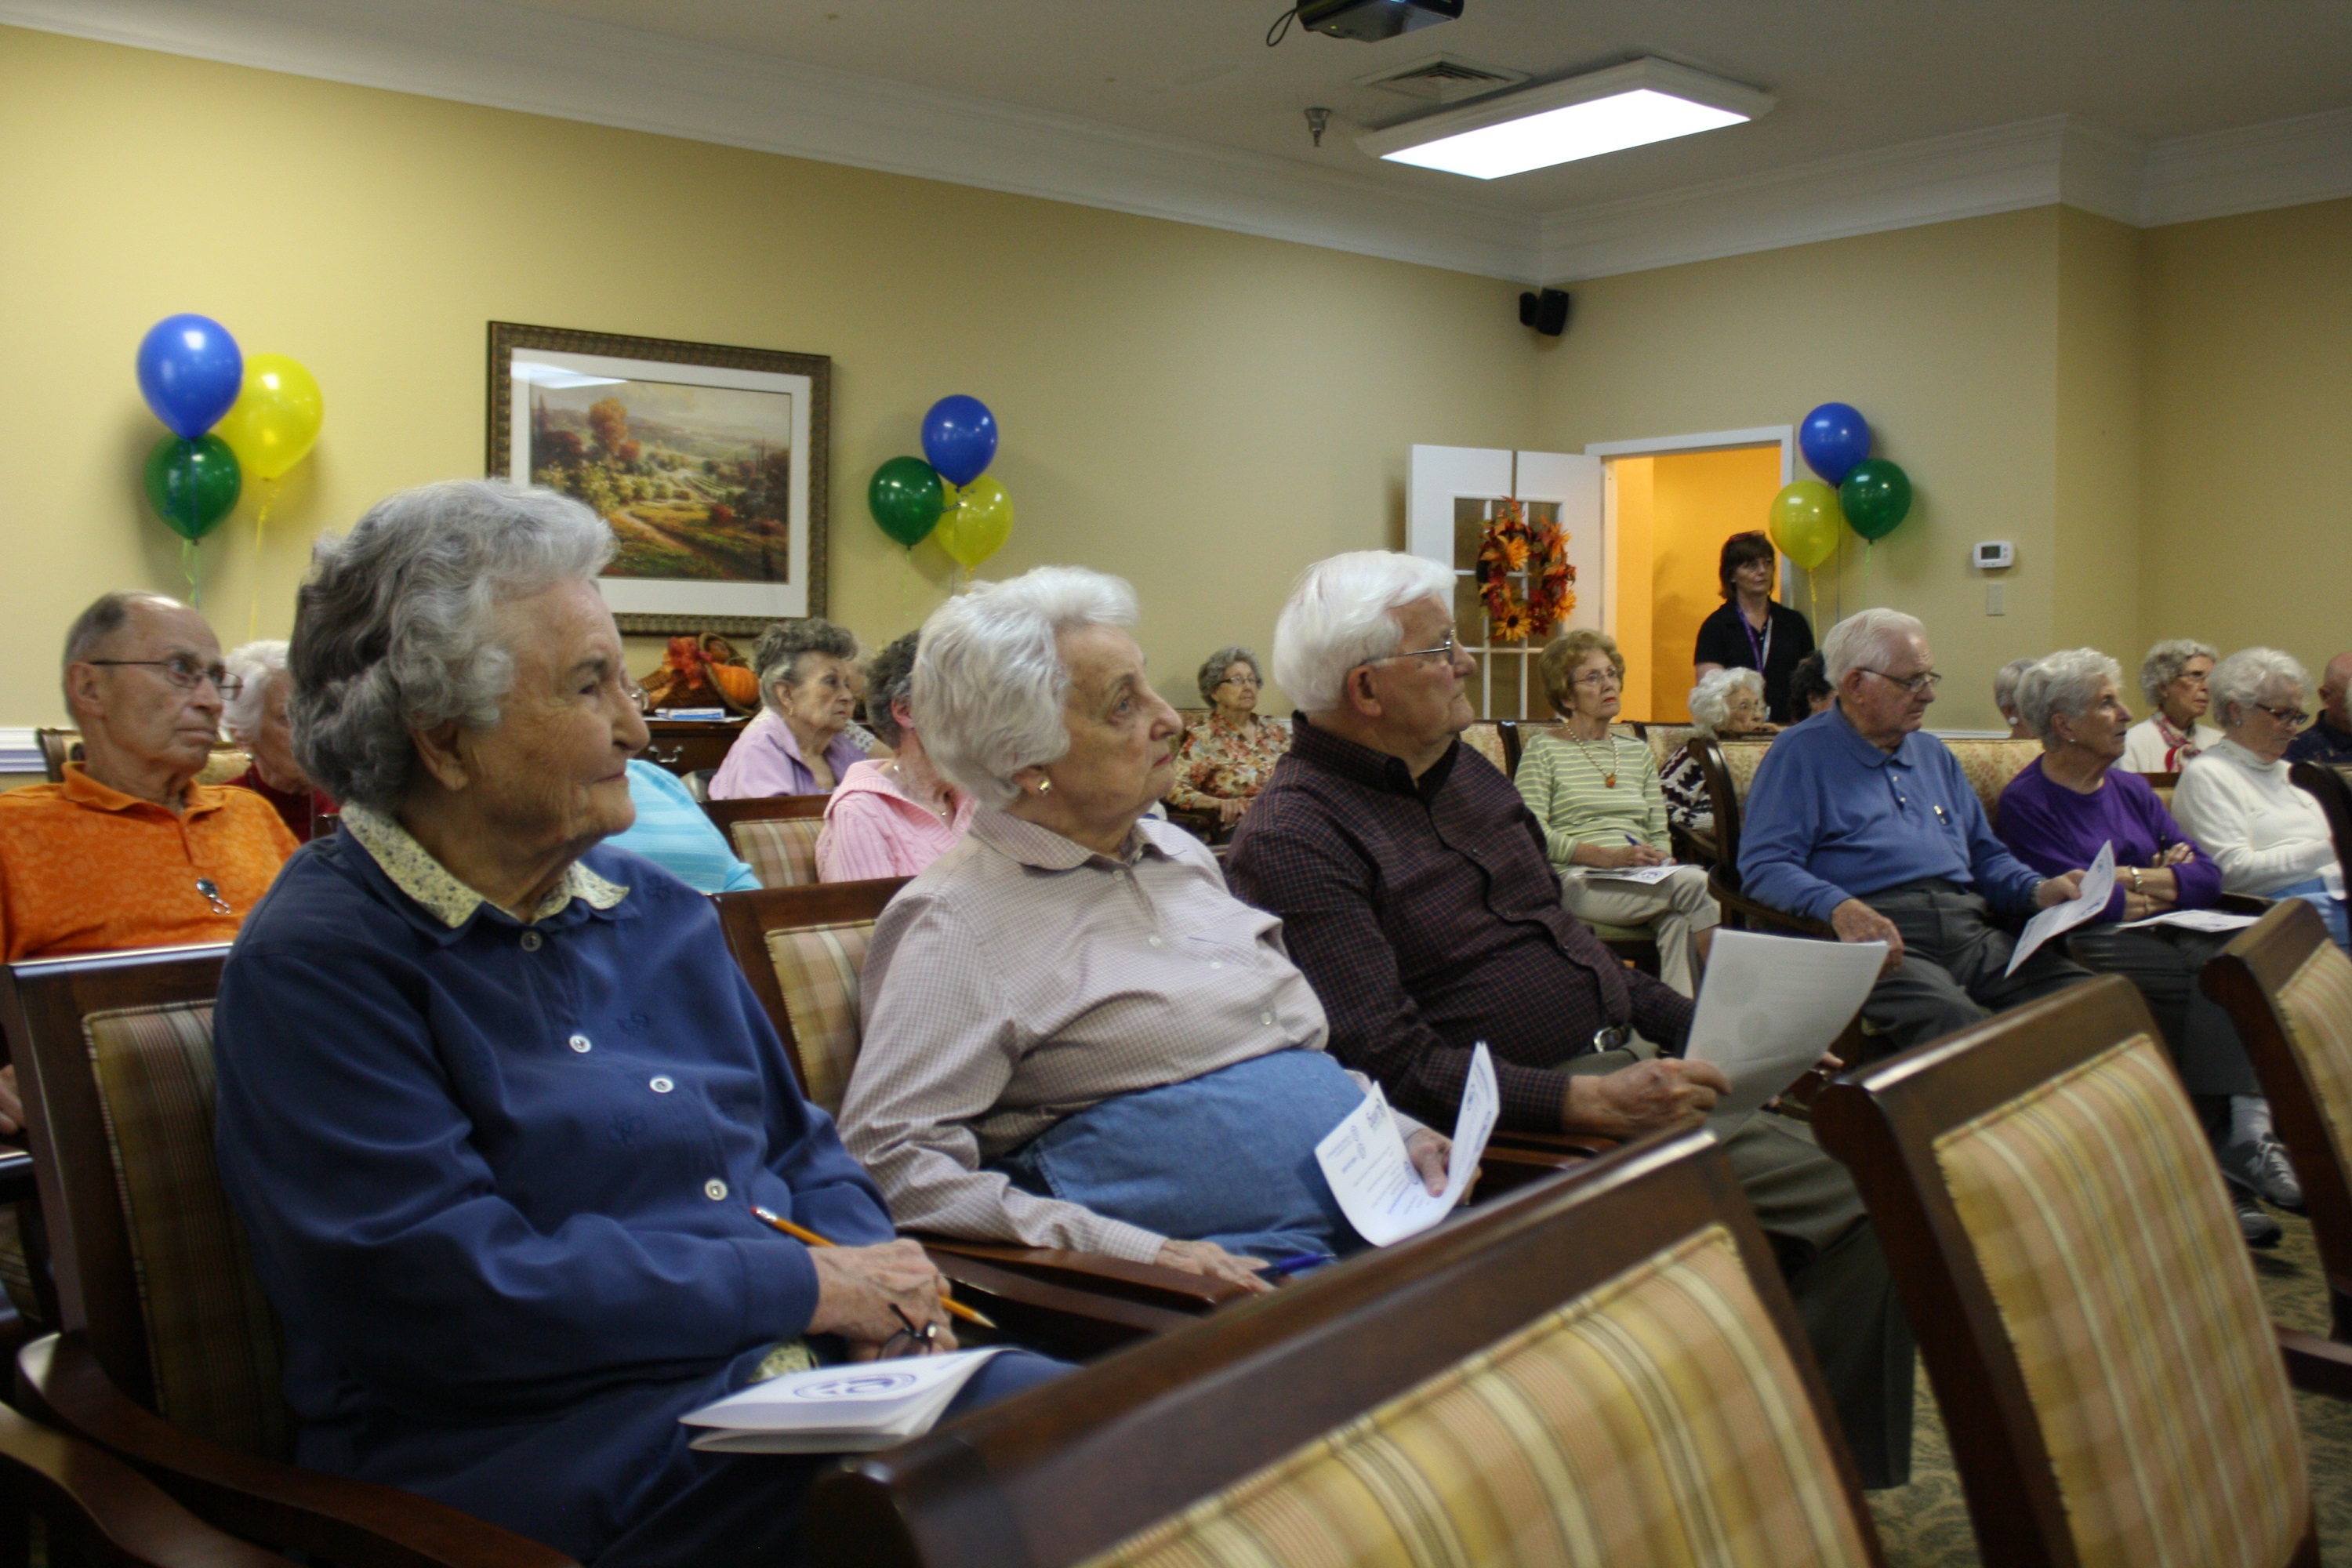 Summit Hills' members enjoyed learning about ConnectedLiving